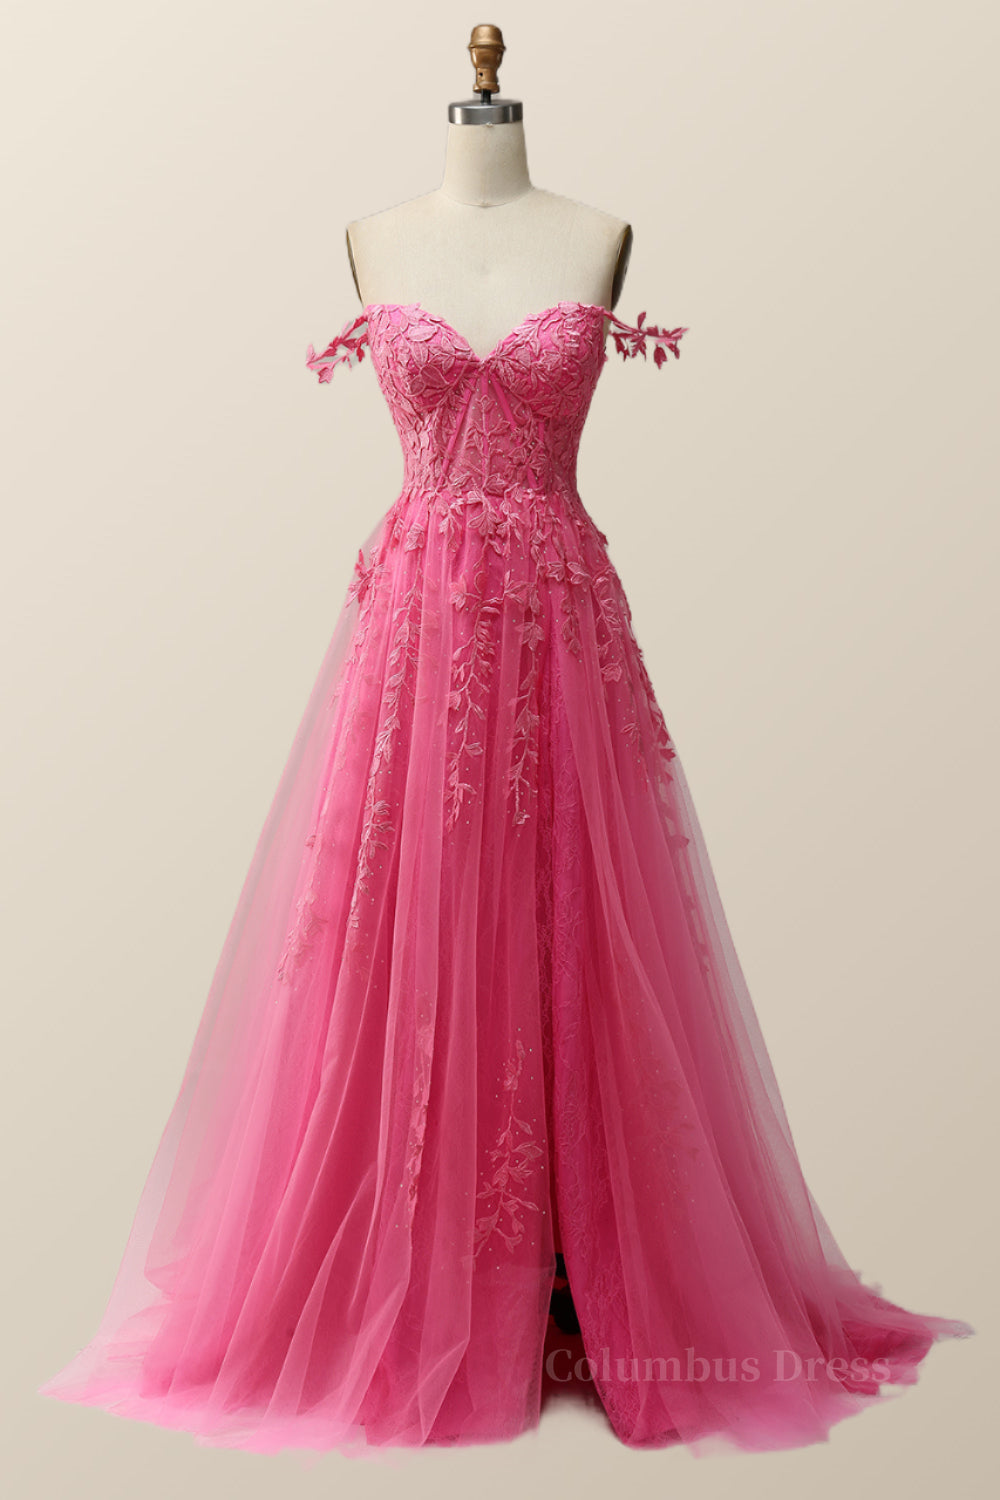 Fancy Outfit, Hot Pink Lace Appliques A-line Long Formal Gown